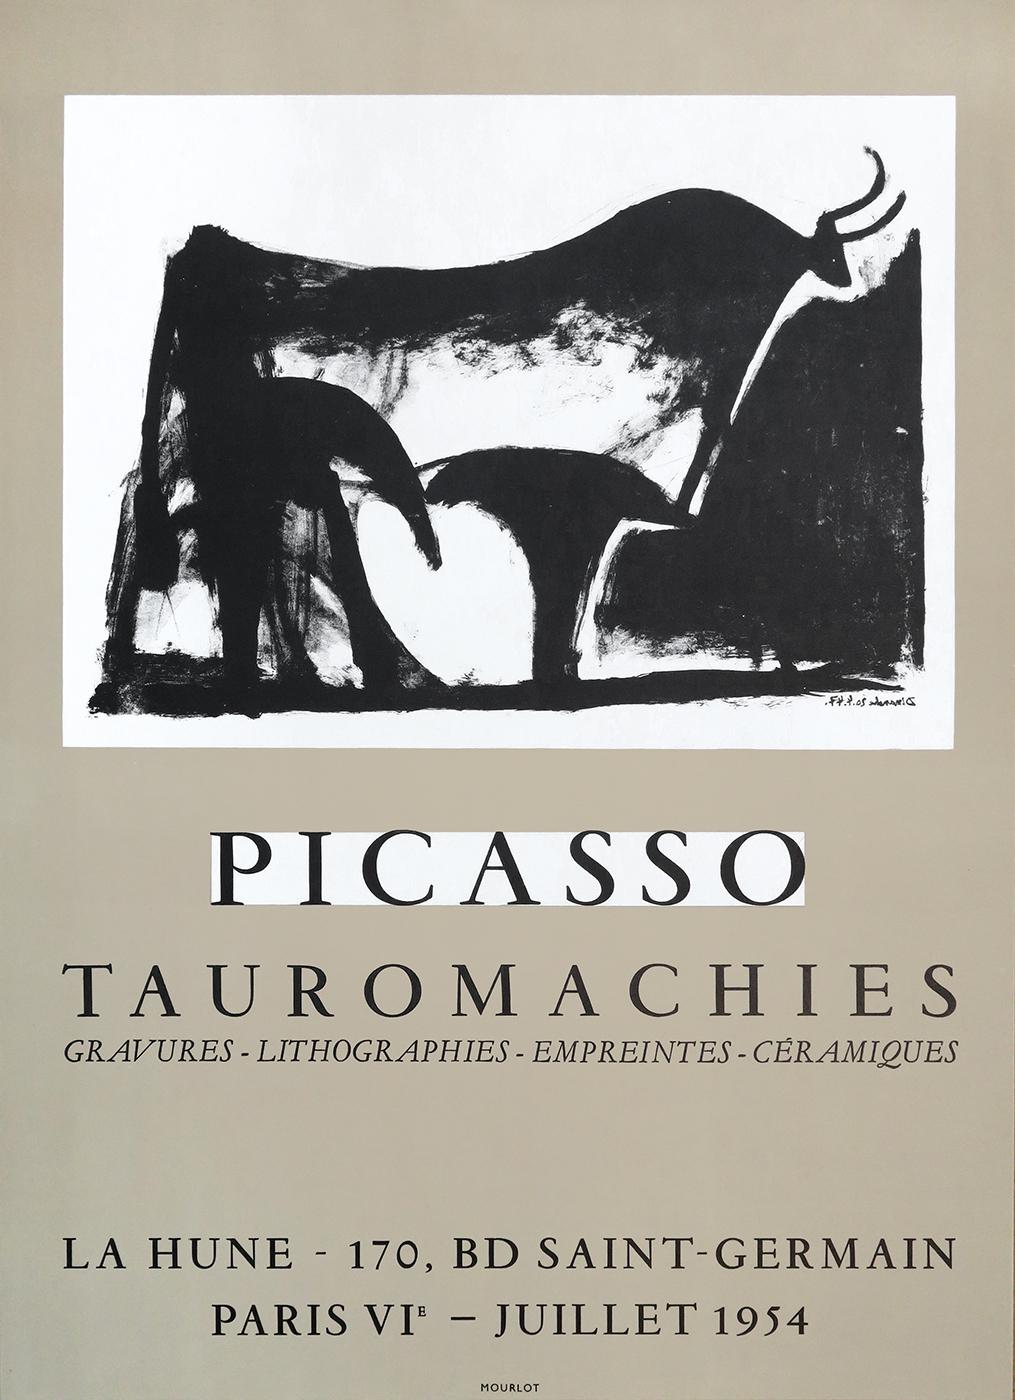 French Pablo Picasso, ‘Tauromachies' at La Hune, 1954 For Sale